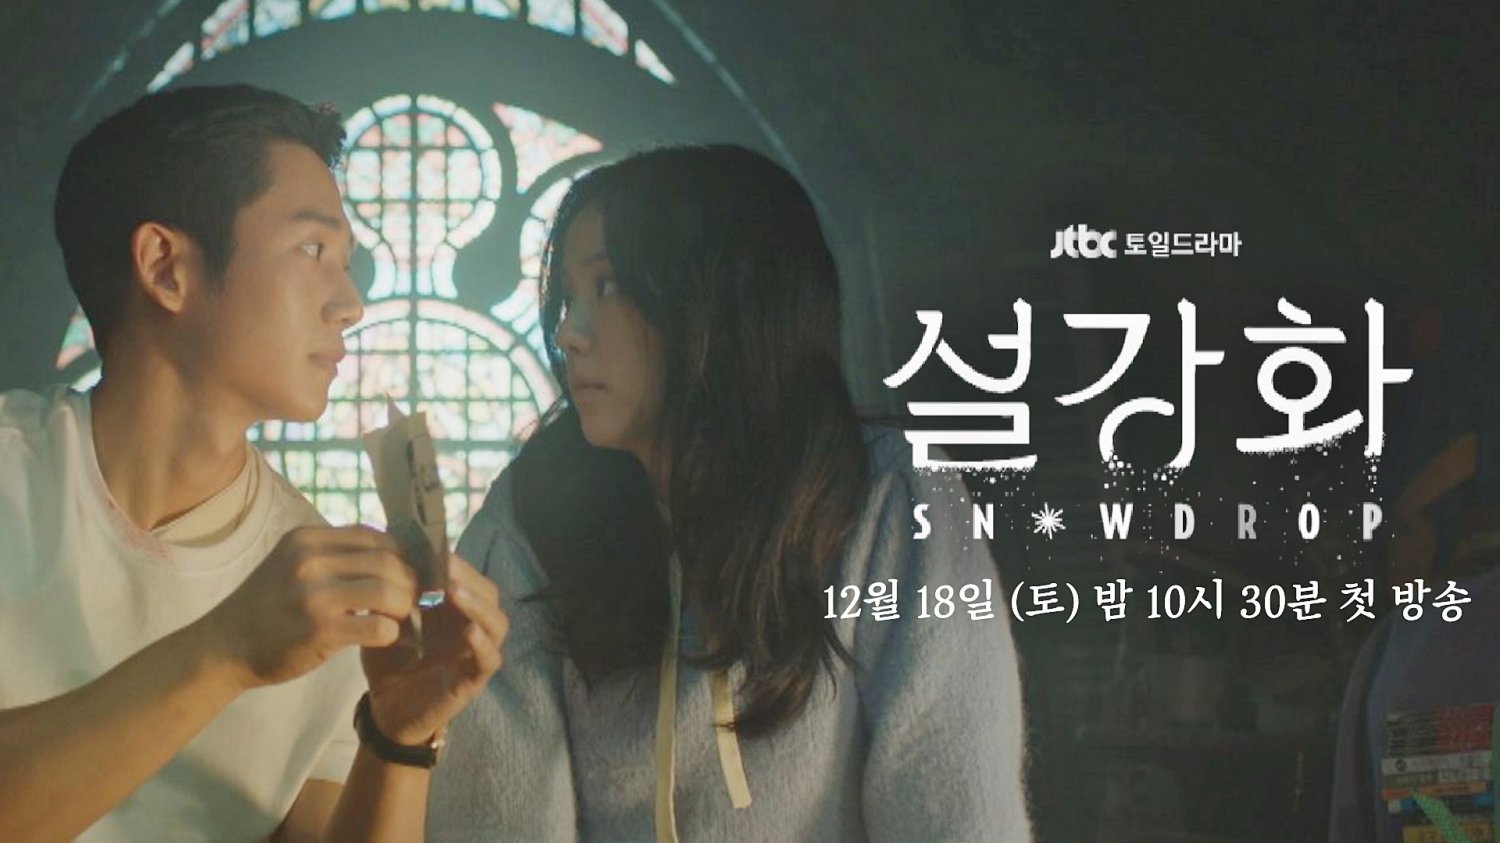 Video Teaser Released For The Uping Korean Drama Snowdrop